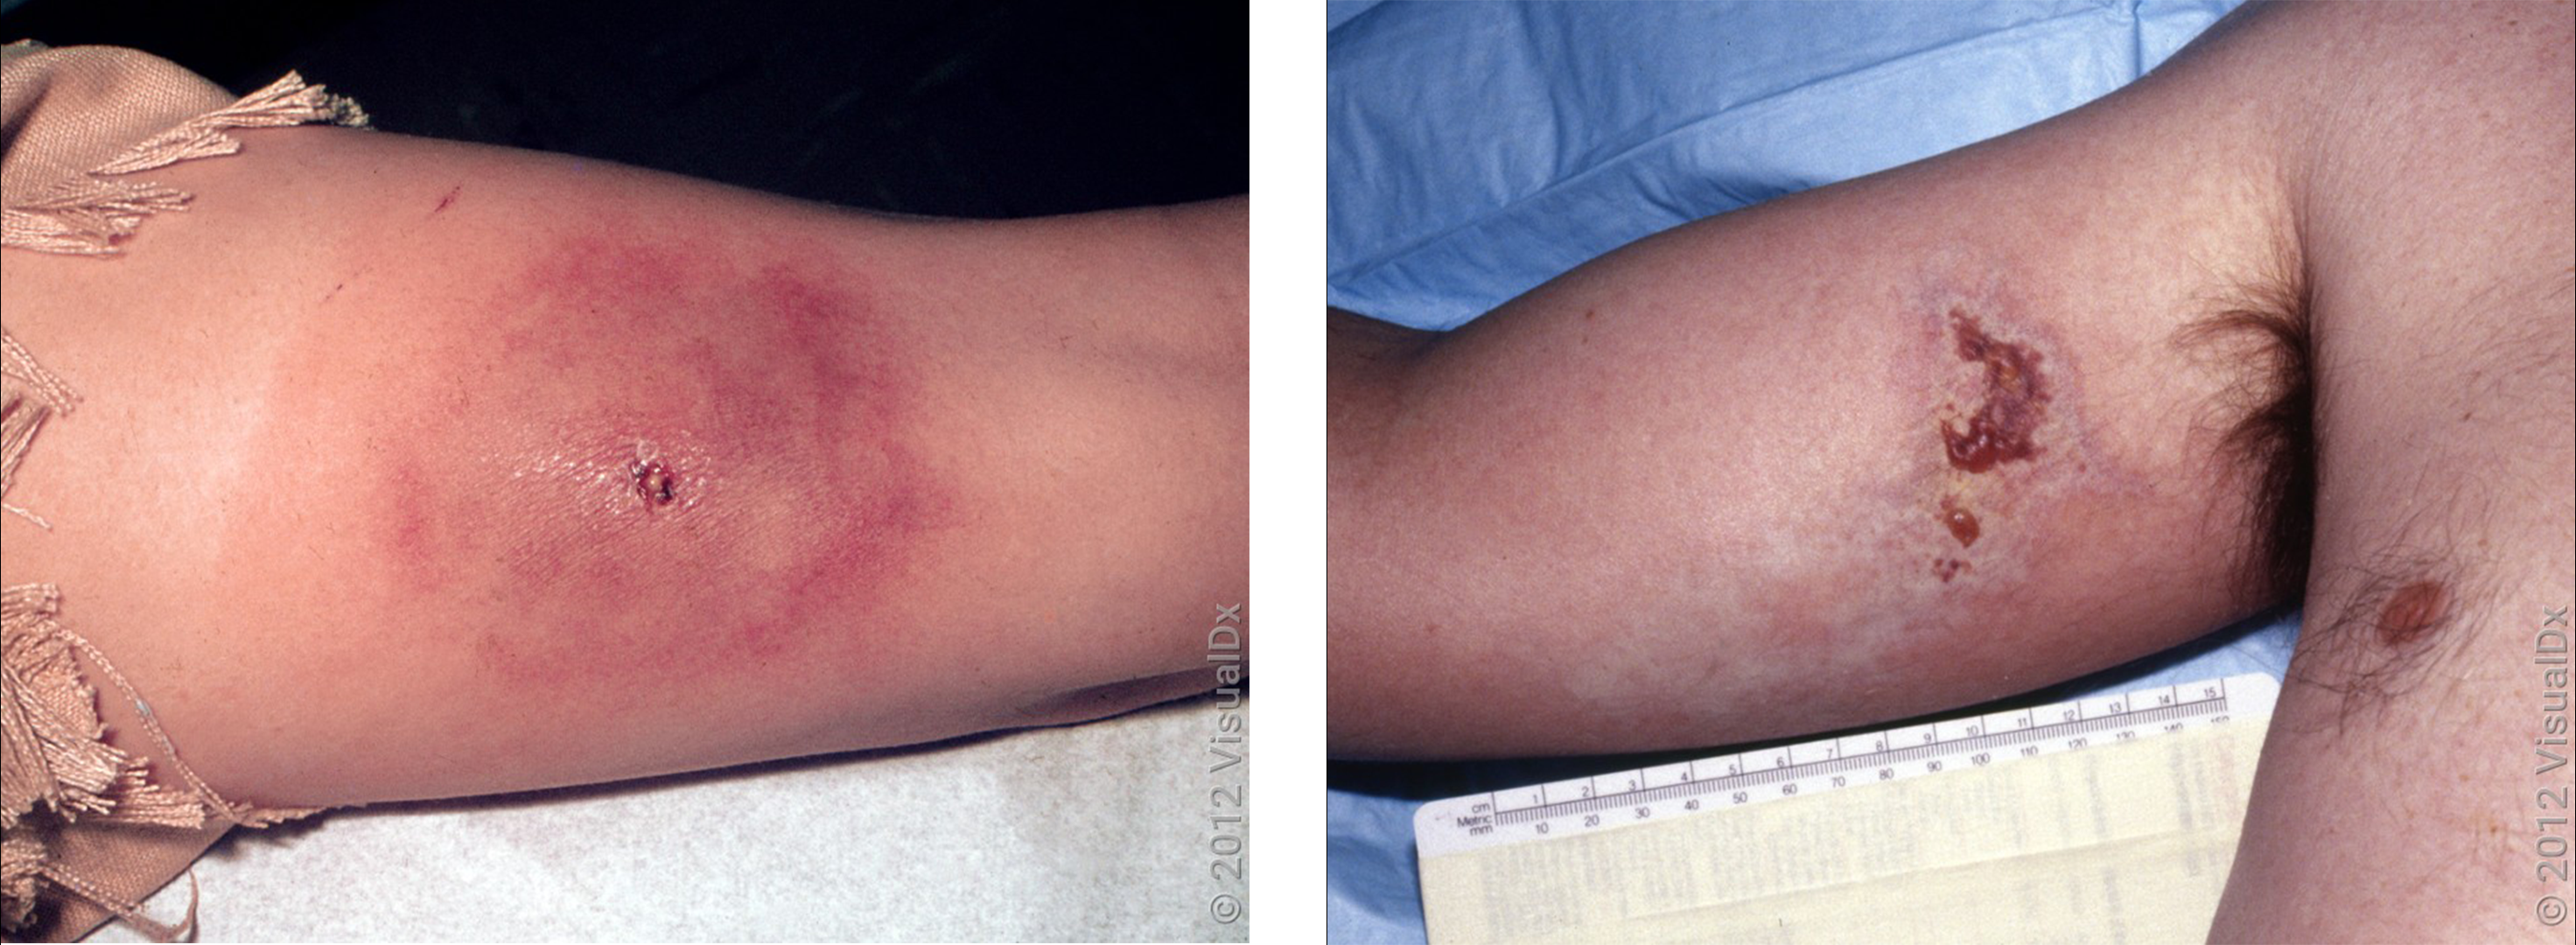 Left: Crust and blood with surrounding purple discoloration from a spider bite on the thigh.  Right: An open wound with surrounding red skin on the arm from a spider bite. 